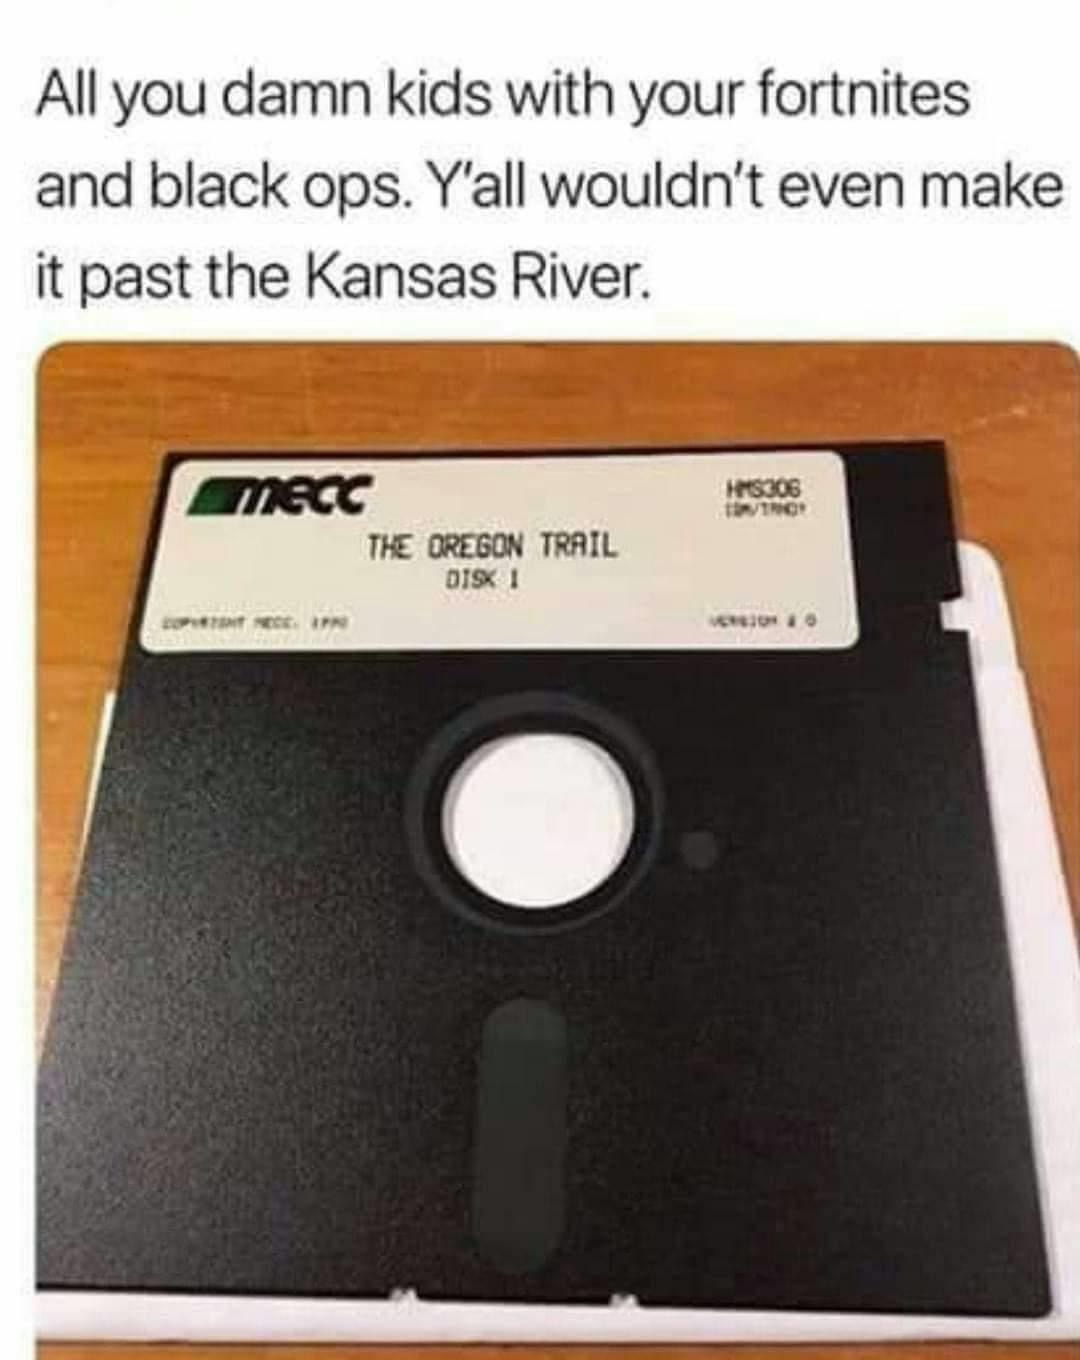 all you damn kids with your fortnites - All you damn kids with your fortnites and black ops. Y'all wouldn't even make it past the Kansas River. RS306 Mecc The Oregon Trail Diski Timp